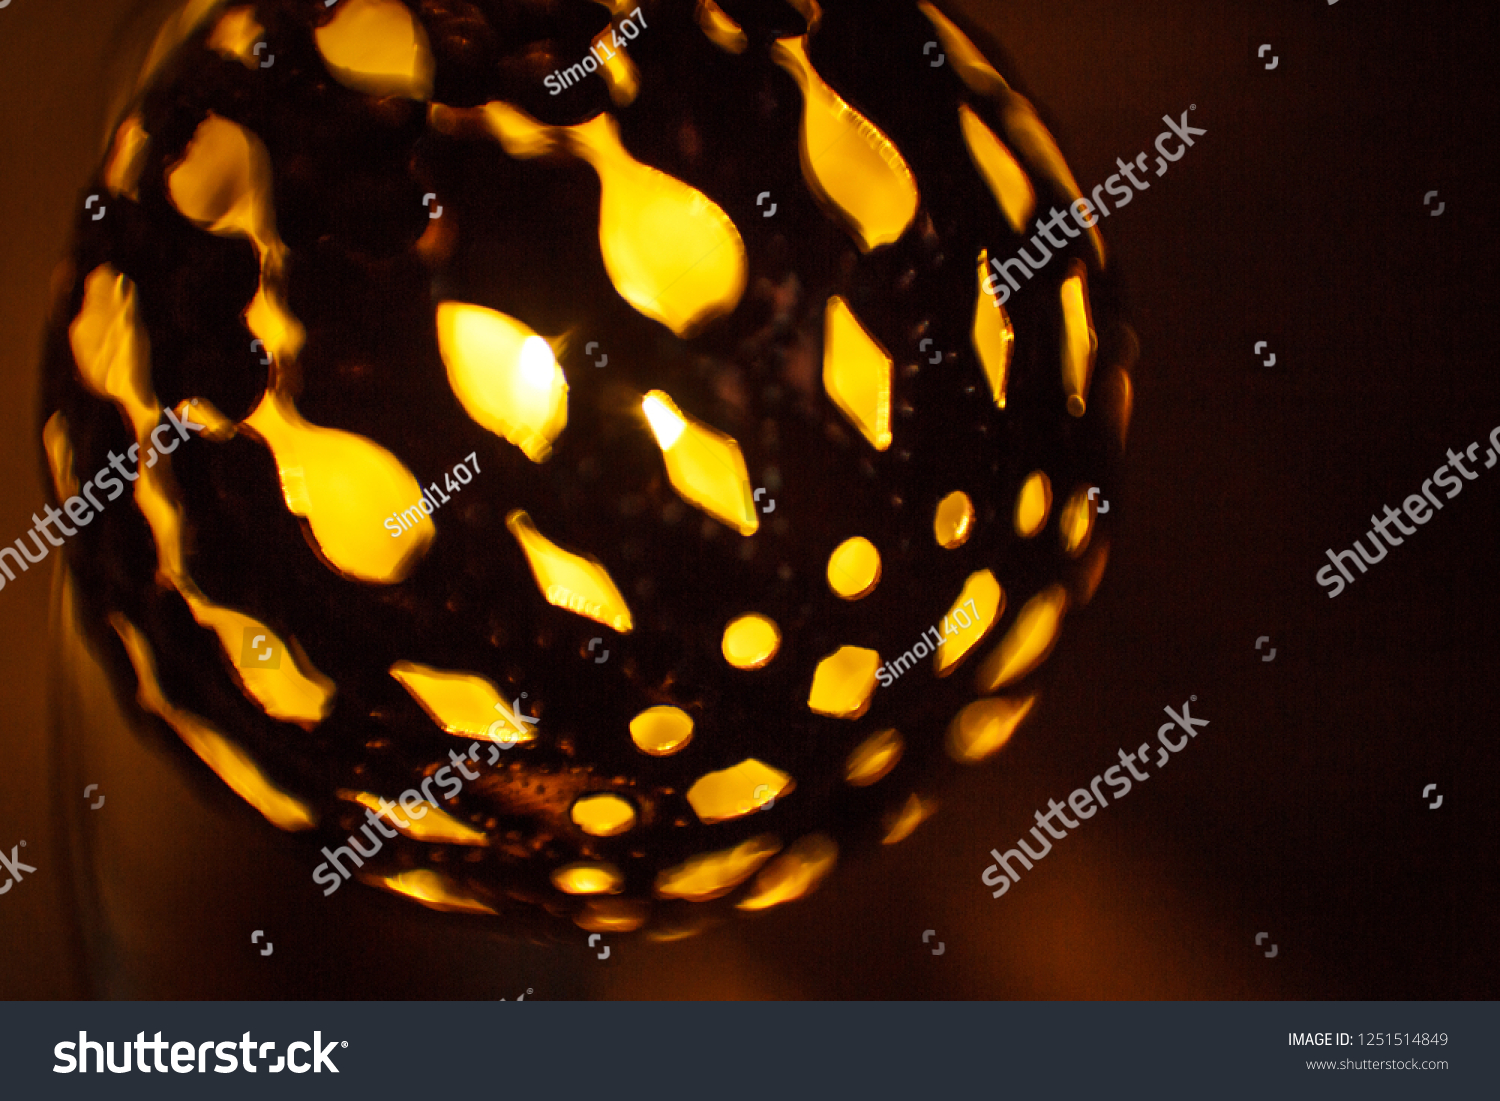 Festive garland carved metal bowl is lit from within with a Golden light. Bronze balls with slots-Christmas lights, creating a festive mood #1251514849